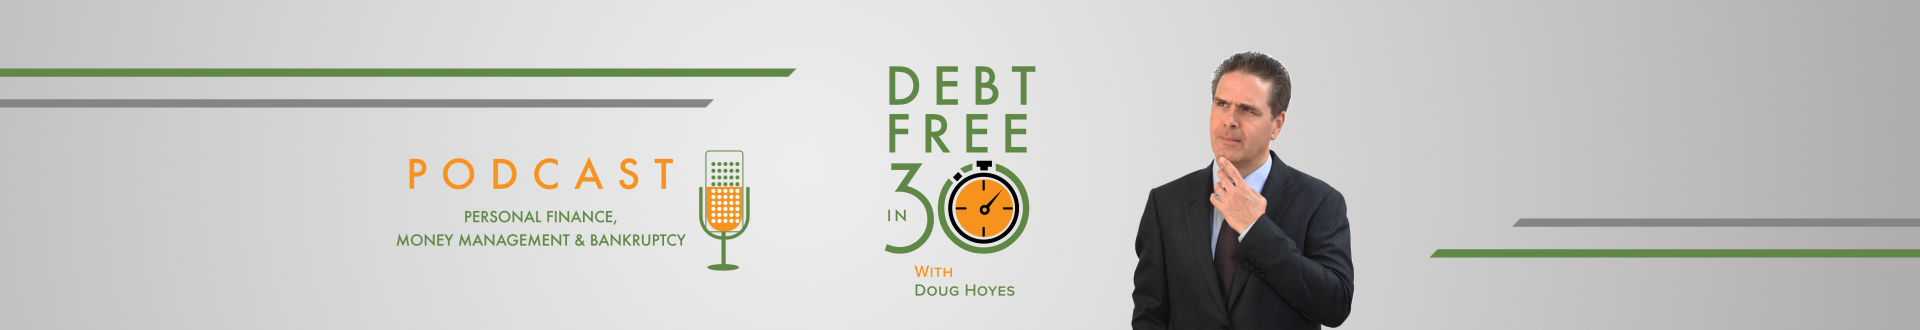 Debt Free in 30 Podcast Archive - Page 33